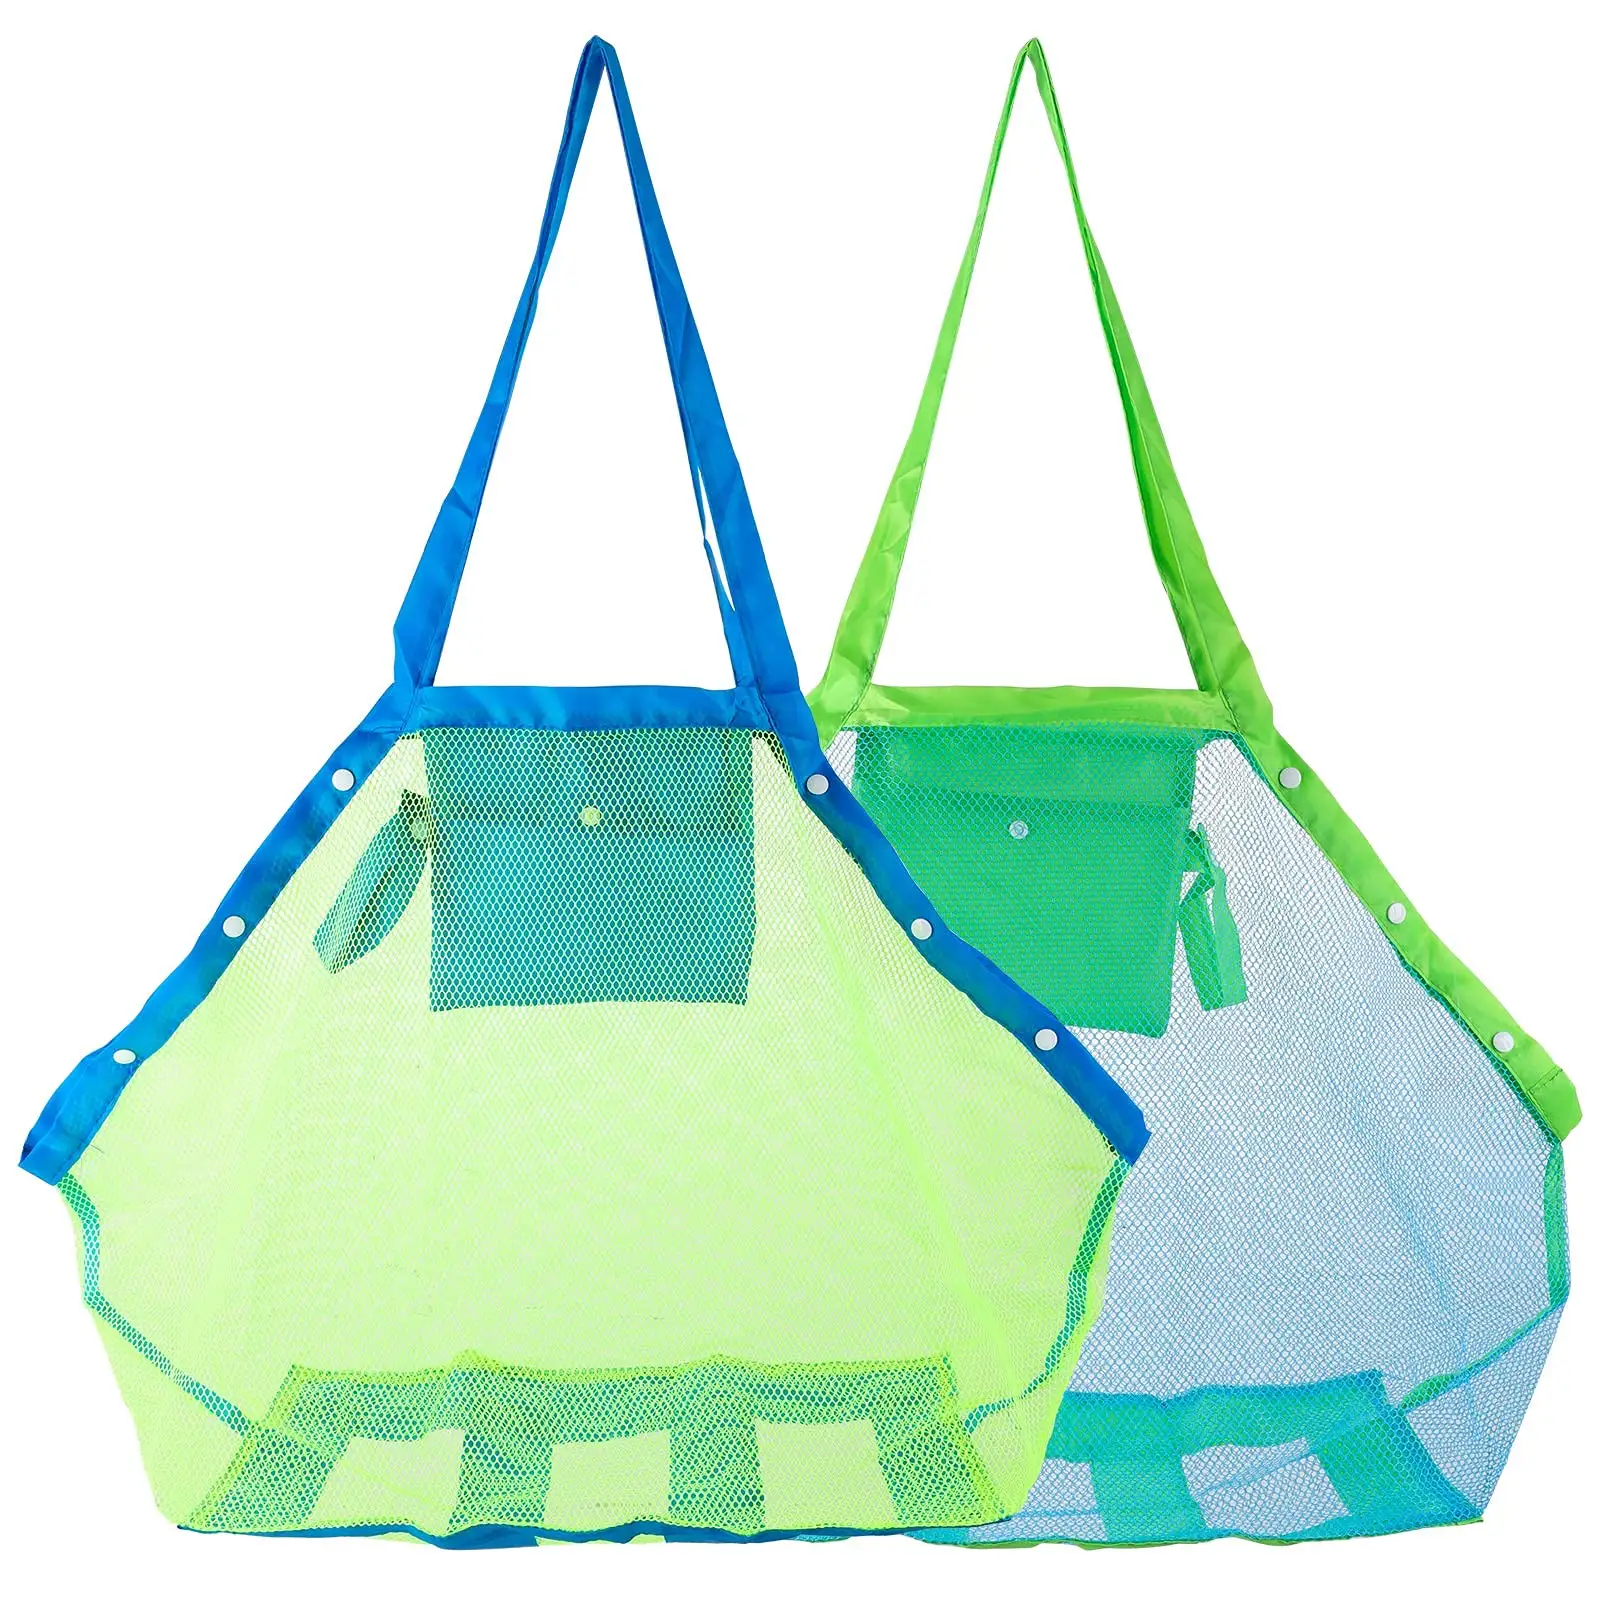 Mesh Beach Bag Extra Large Beach Bags and Totes Tote Backpack Children Beach Toy fast collecting net bag